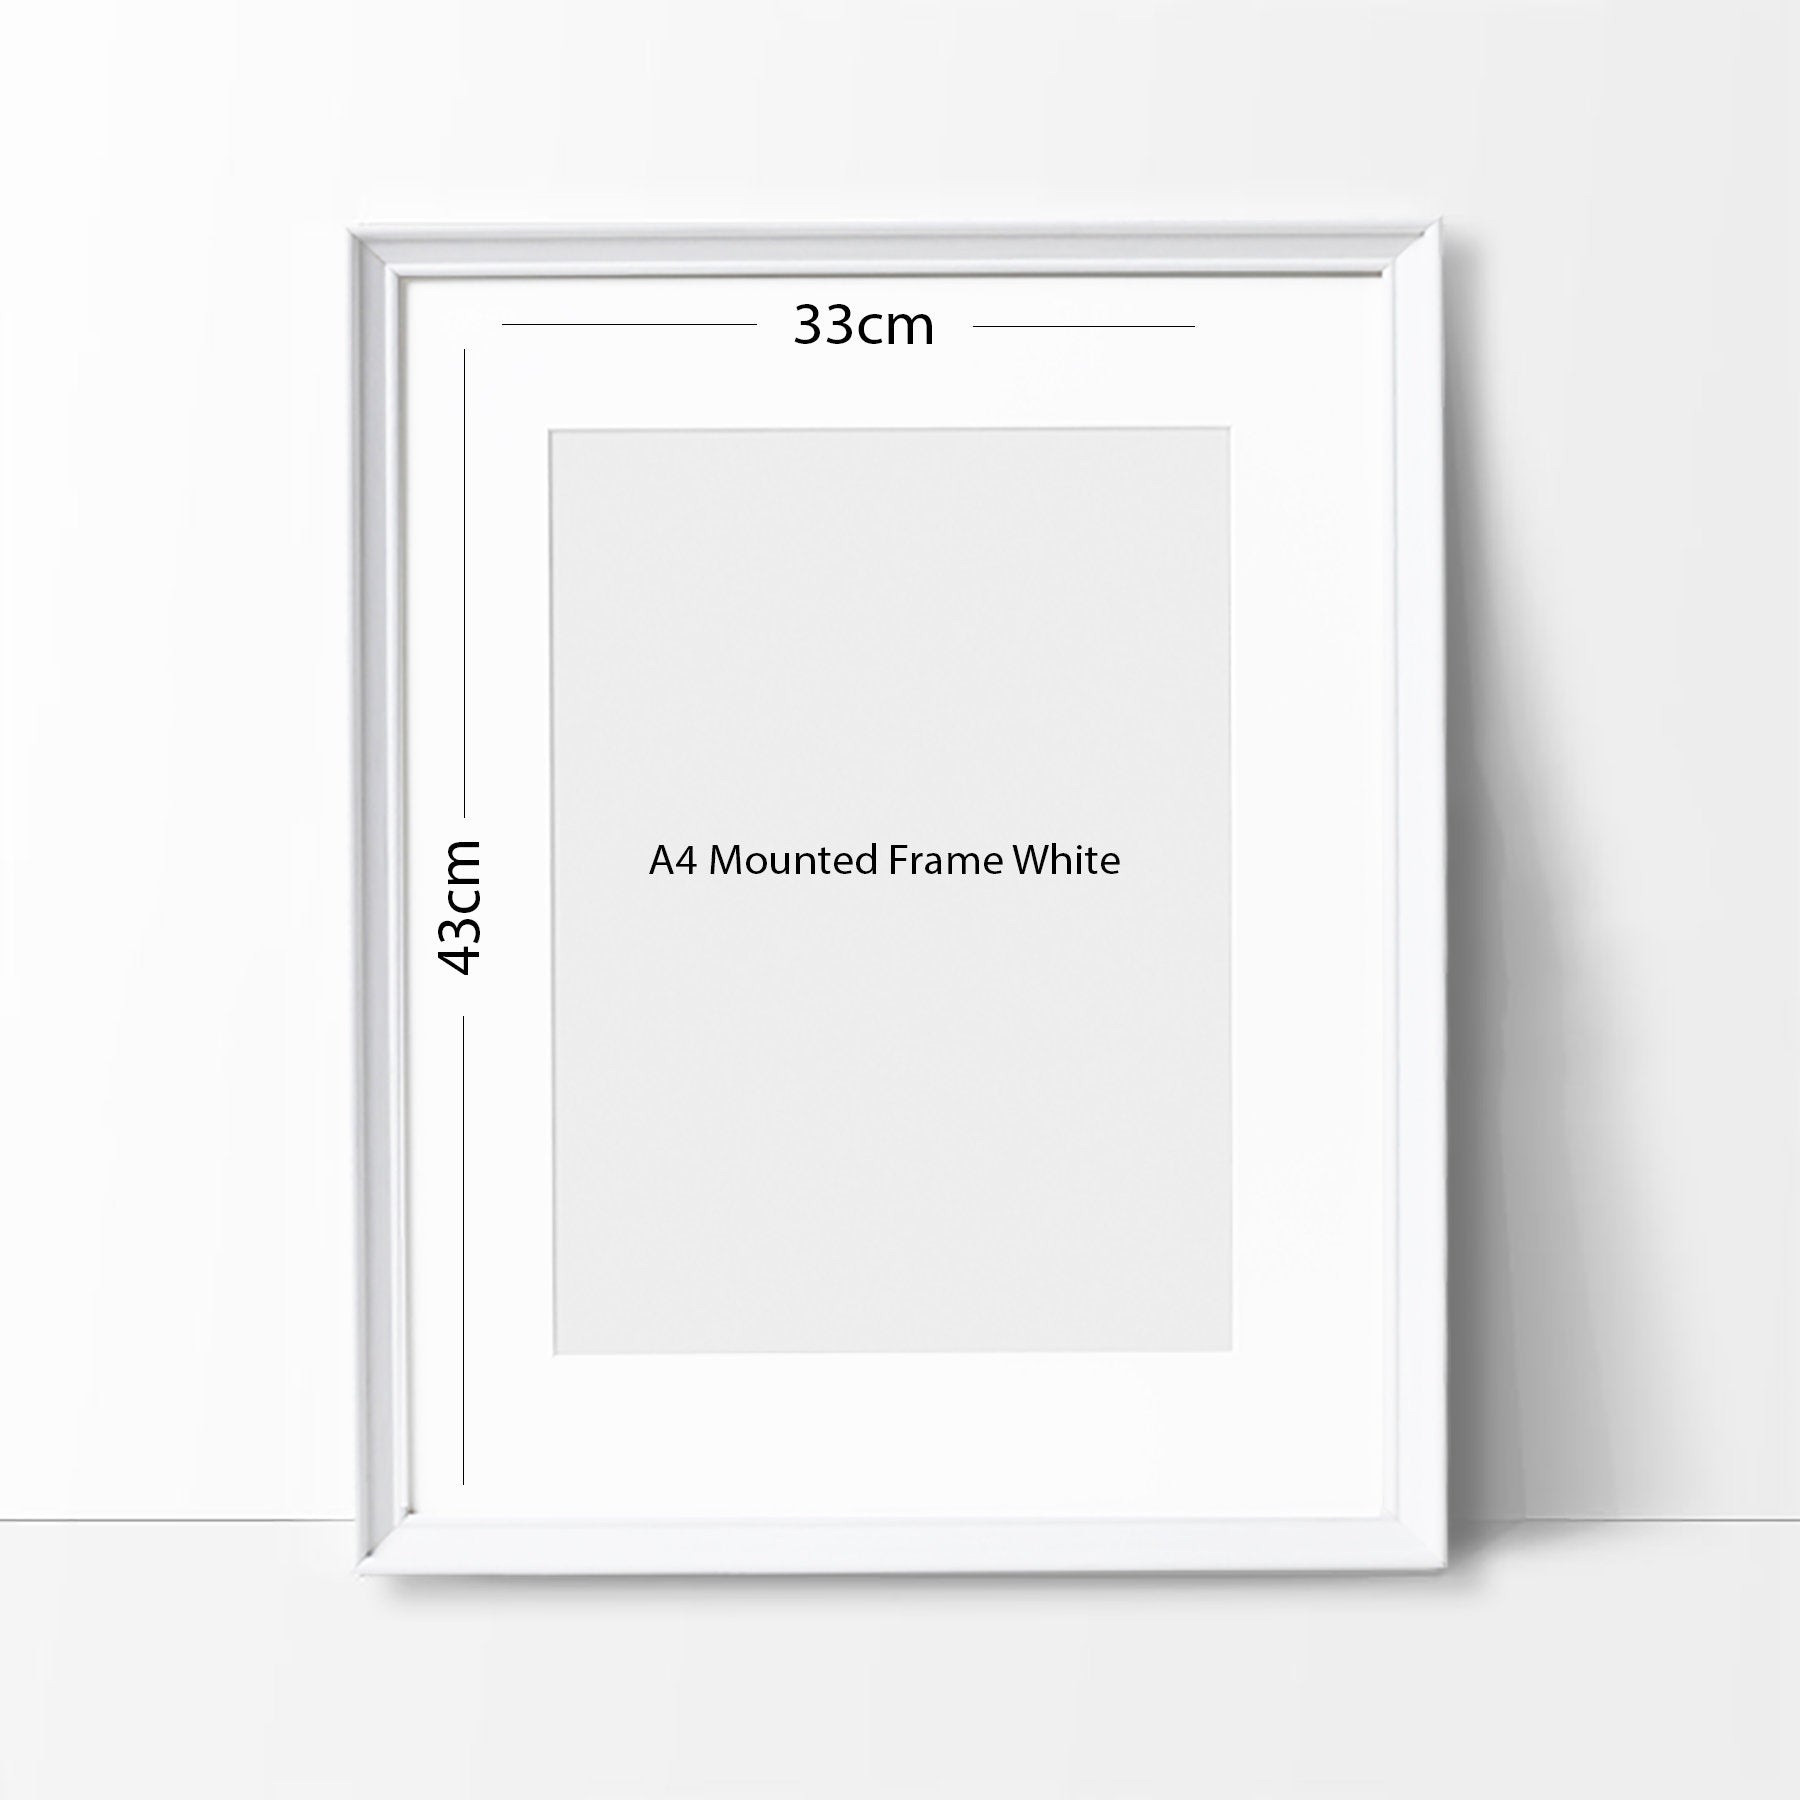 Ireland Minimalist Watercolor Art Print Poster Gift Idea For Him Or Her | Rugby  Print Poster Art